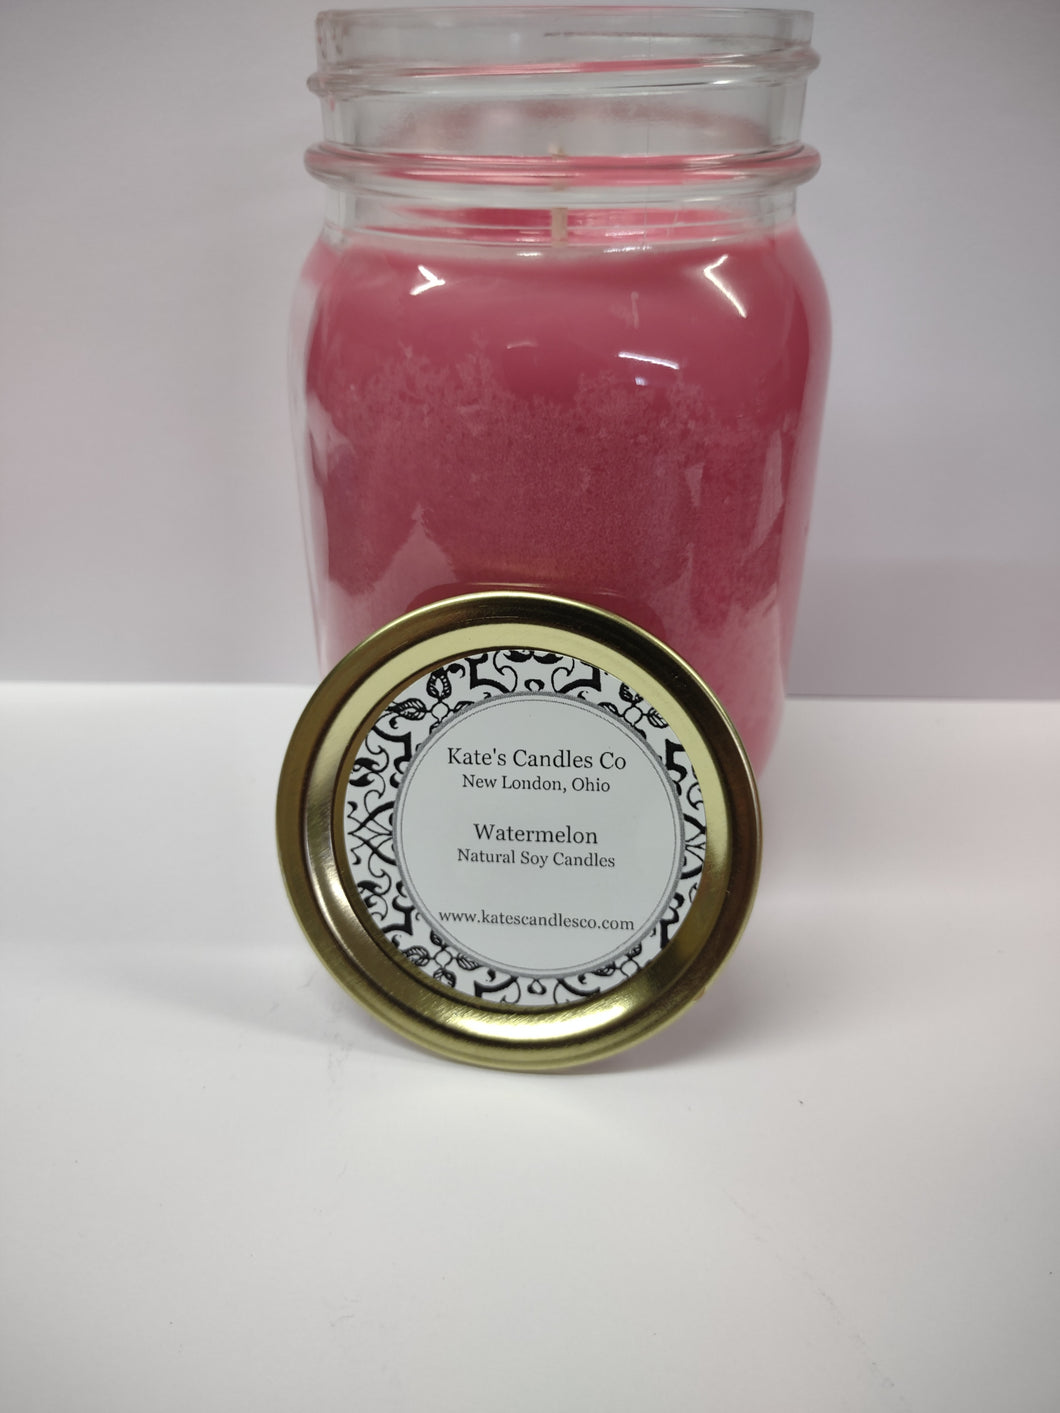 Watermelon Scented Soy Candles & Soy Wax Melts - Kate's Candles Co.